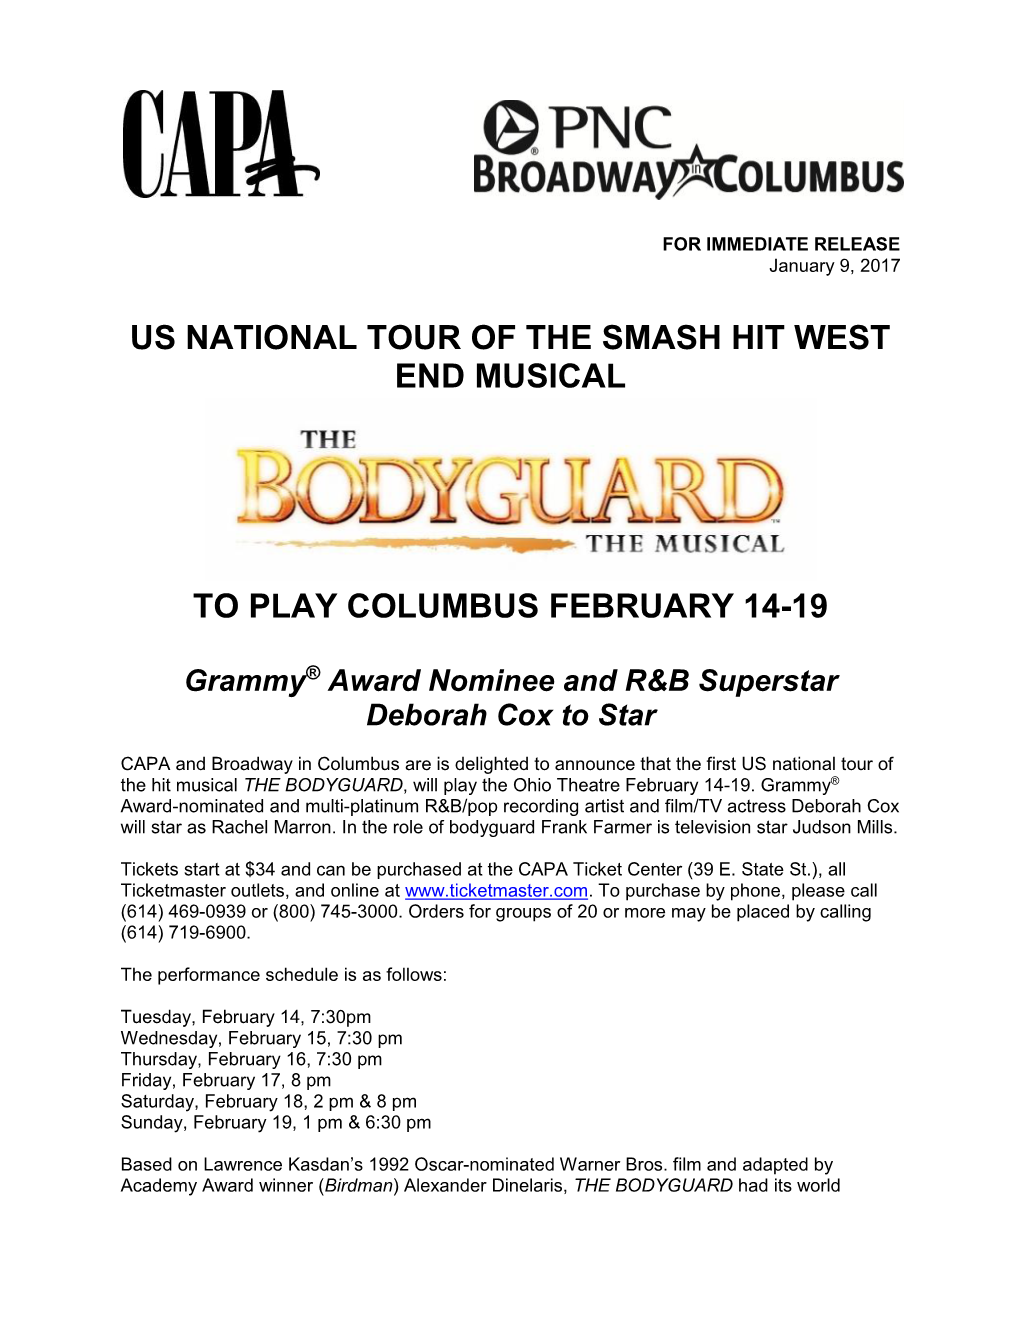 Us National Tour of the Smash Hit West End Musical to Play Columbus